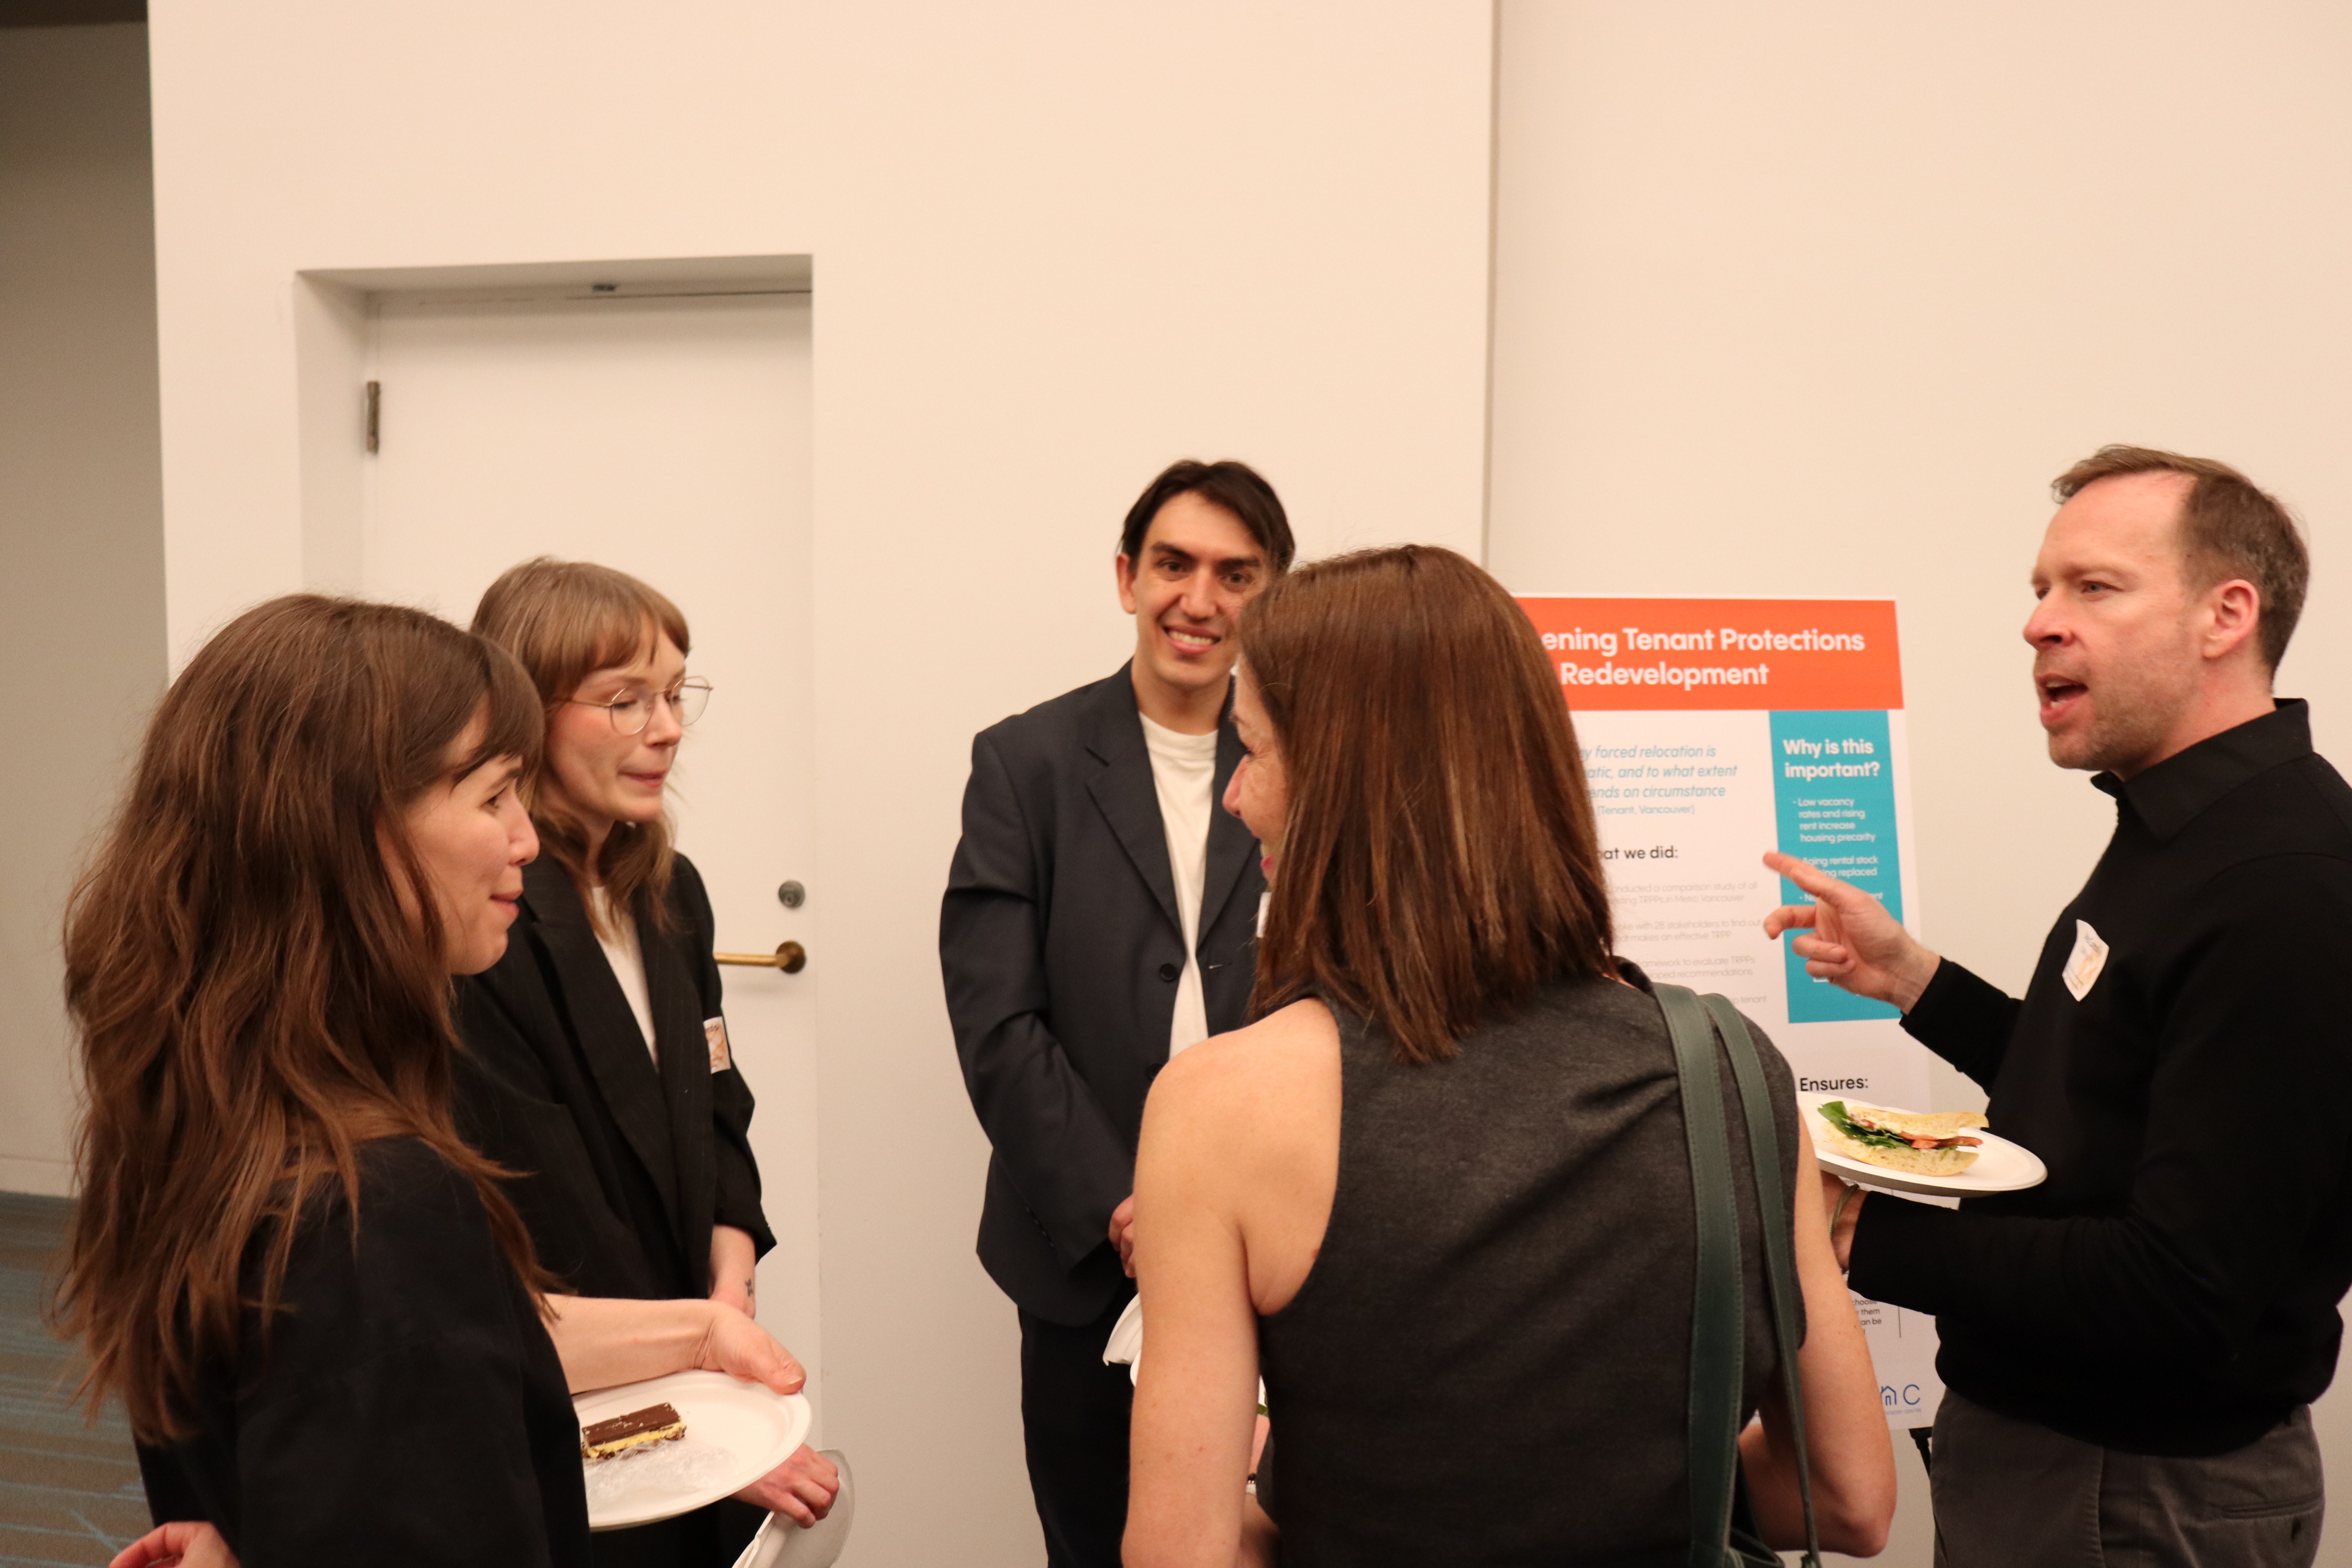 Faculty and students discuss projects over food